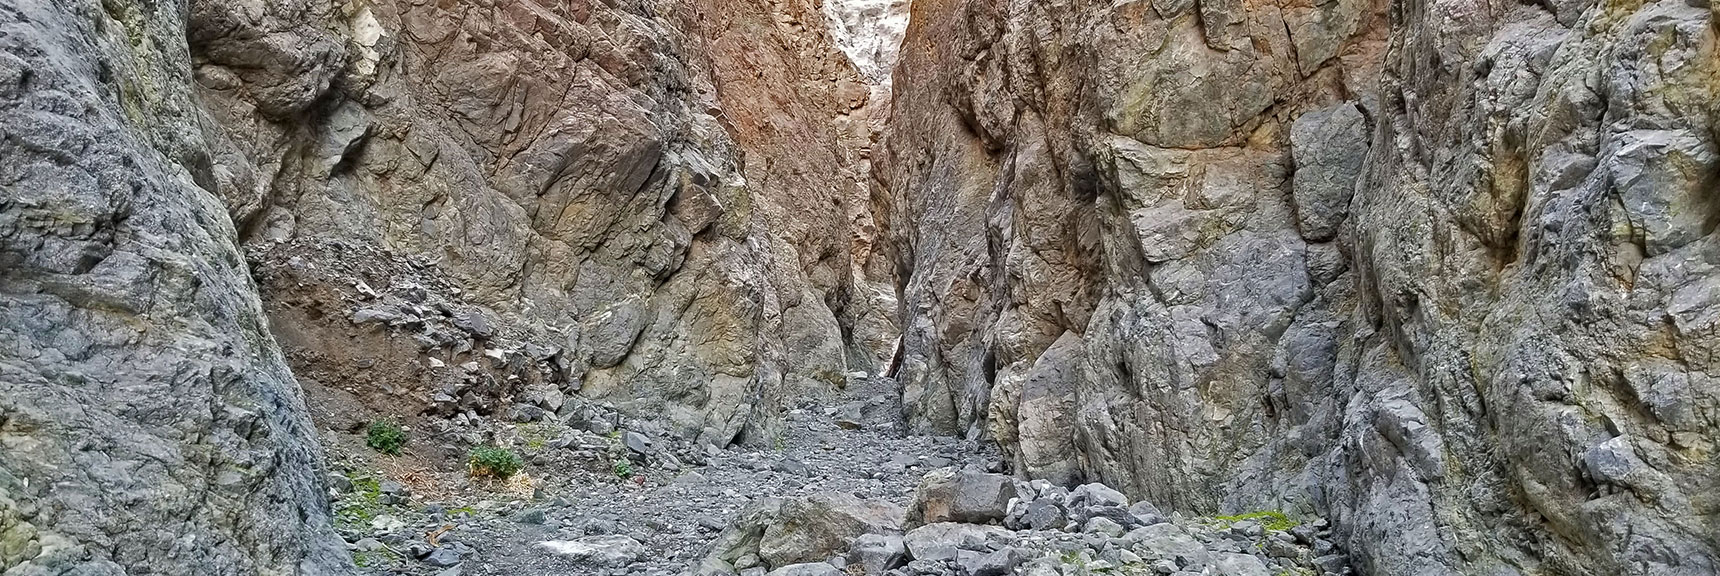 Nearing the High Cliff Barrier and Waterfall in Willow Canyon. | Willow Canyon | Death Valley National Park, California